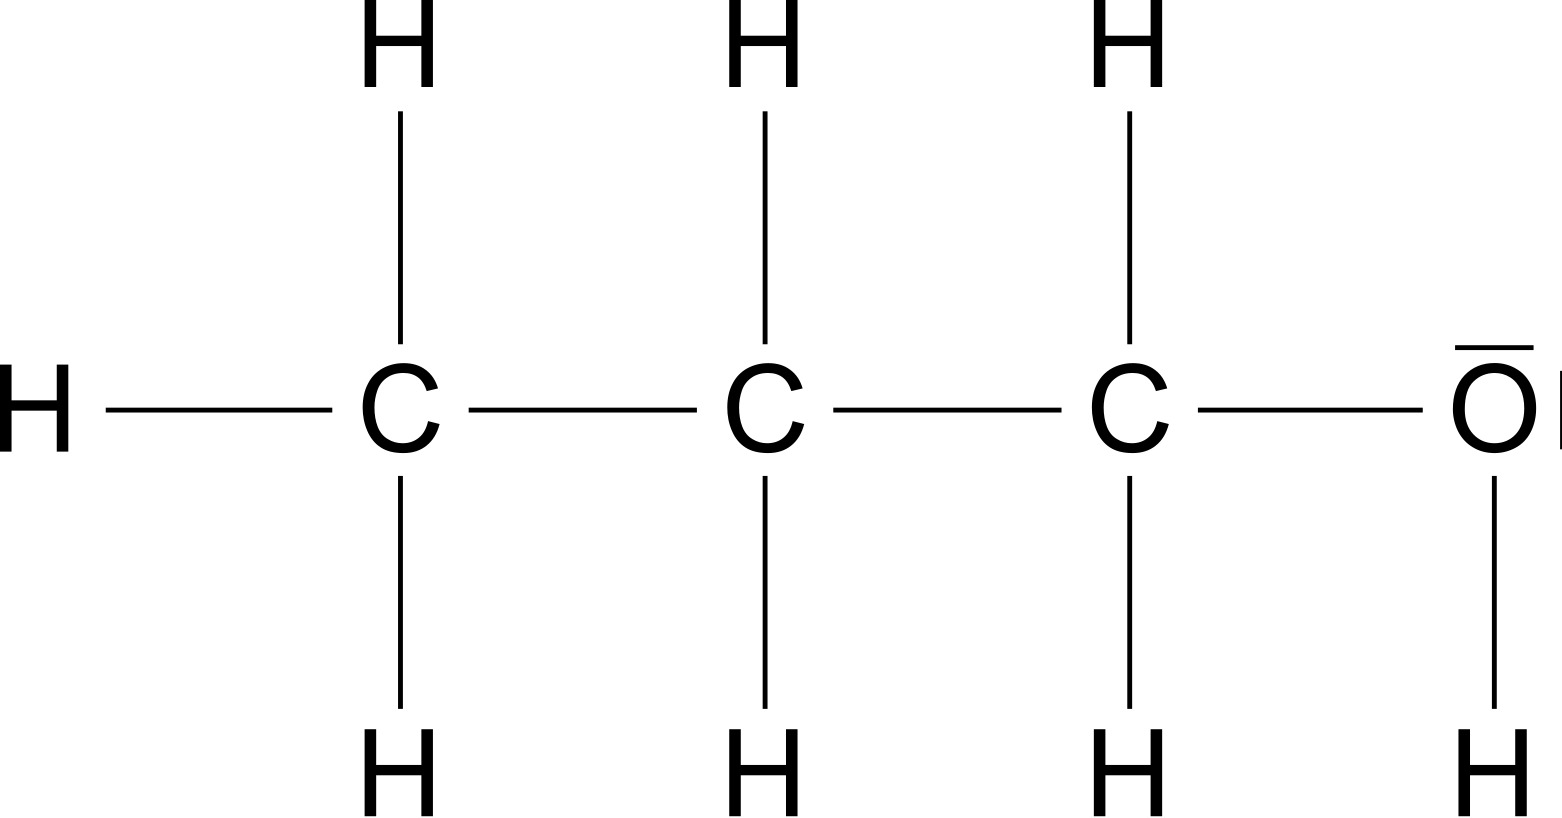 Methanol Ethanol And N-propanol Are Three Common Alcohols